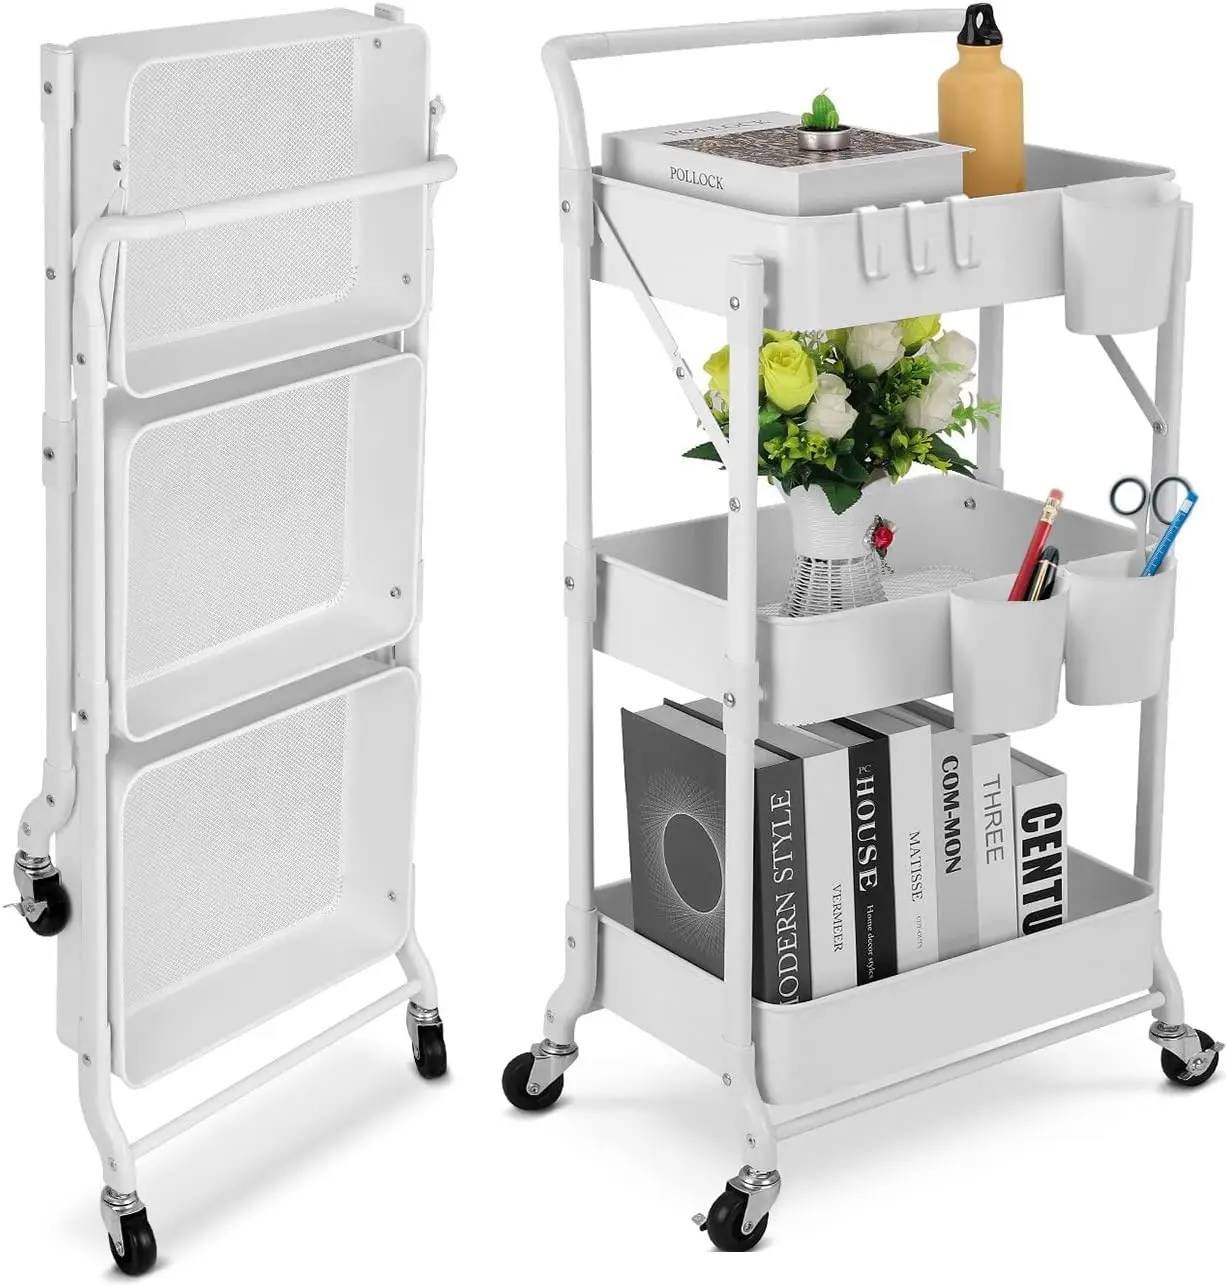 3-tier-metal-utility-rolling-cart-folding-mobile-multi-function-storage-trolley-organizer-cart-for-home-library-office-white